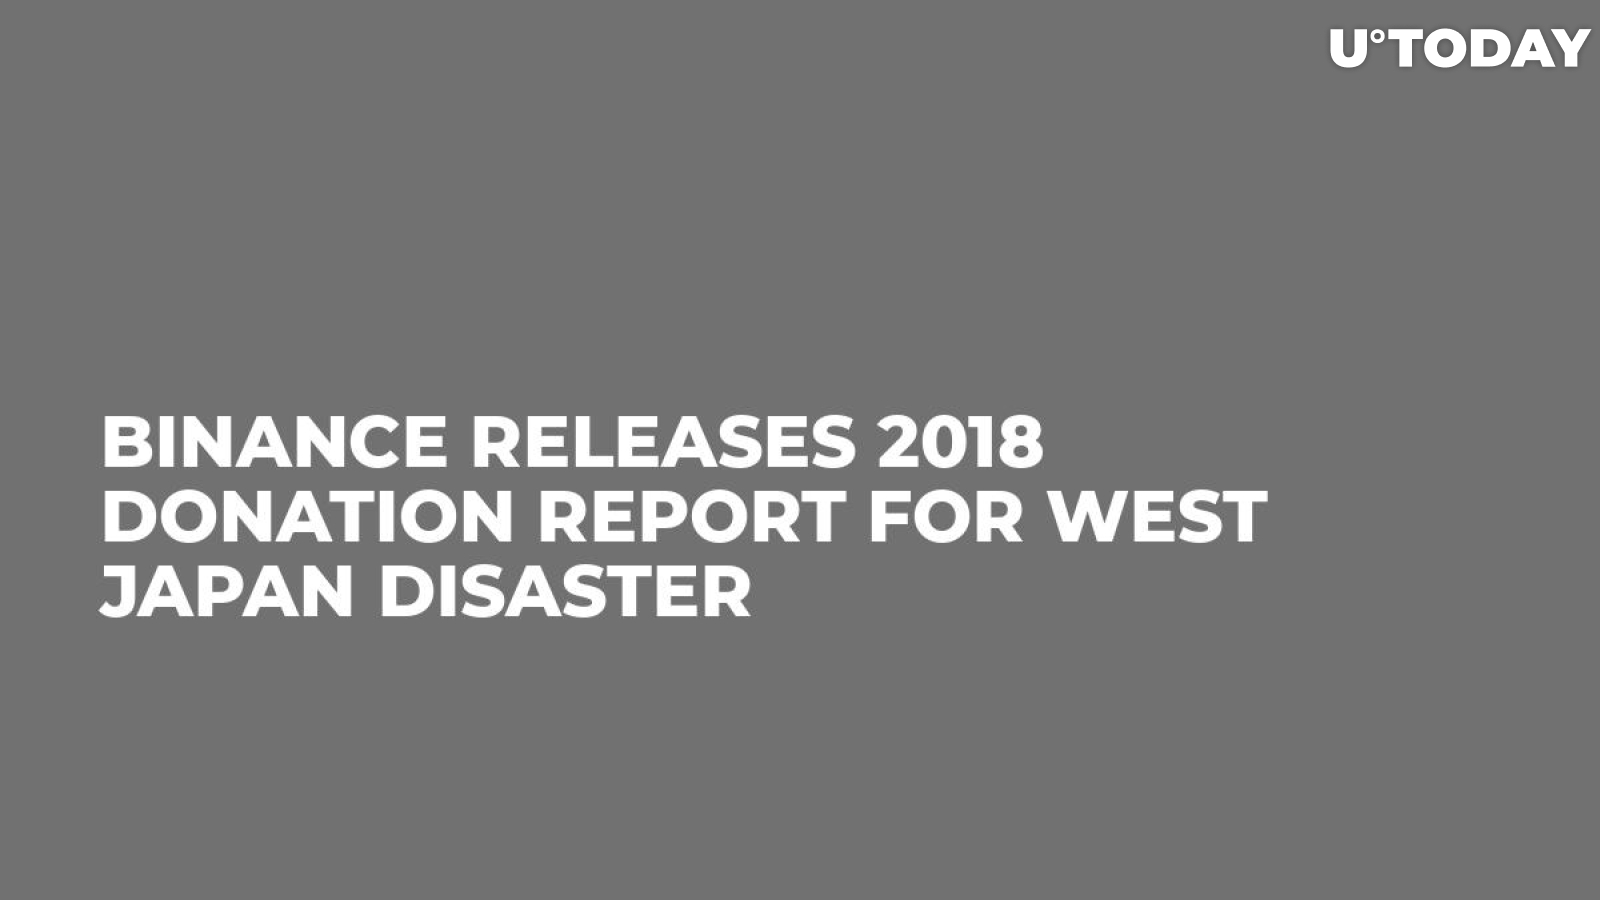 Binance Releases 2018 Donation Report for West Japan Disaster